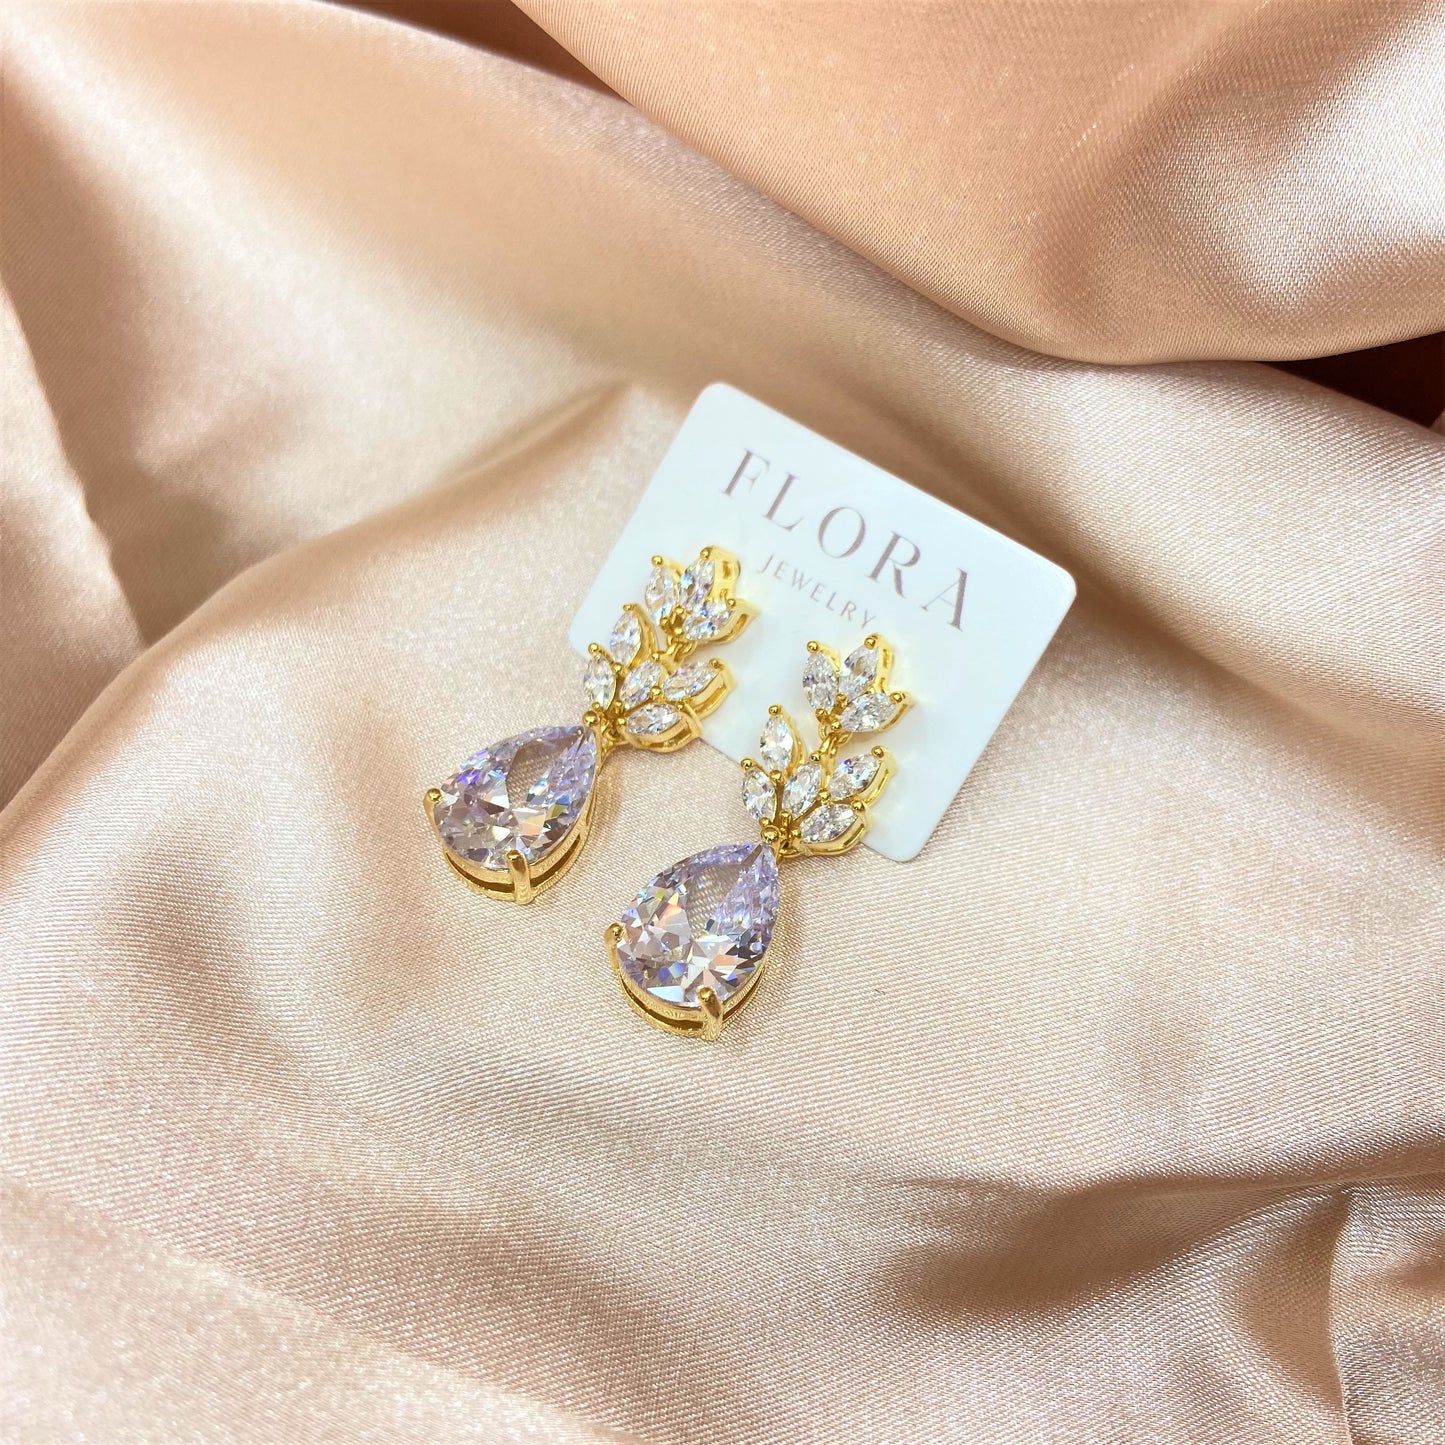 gold earrings with floral details for wedding day